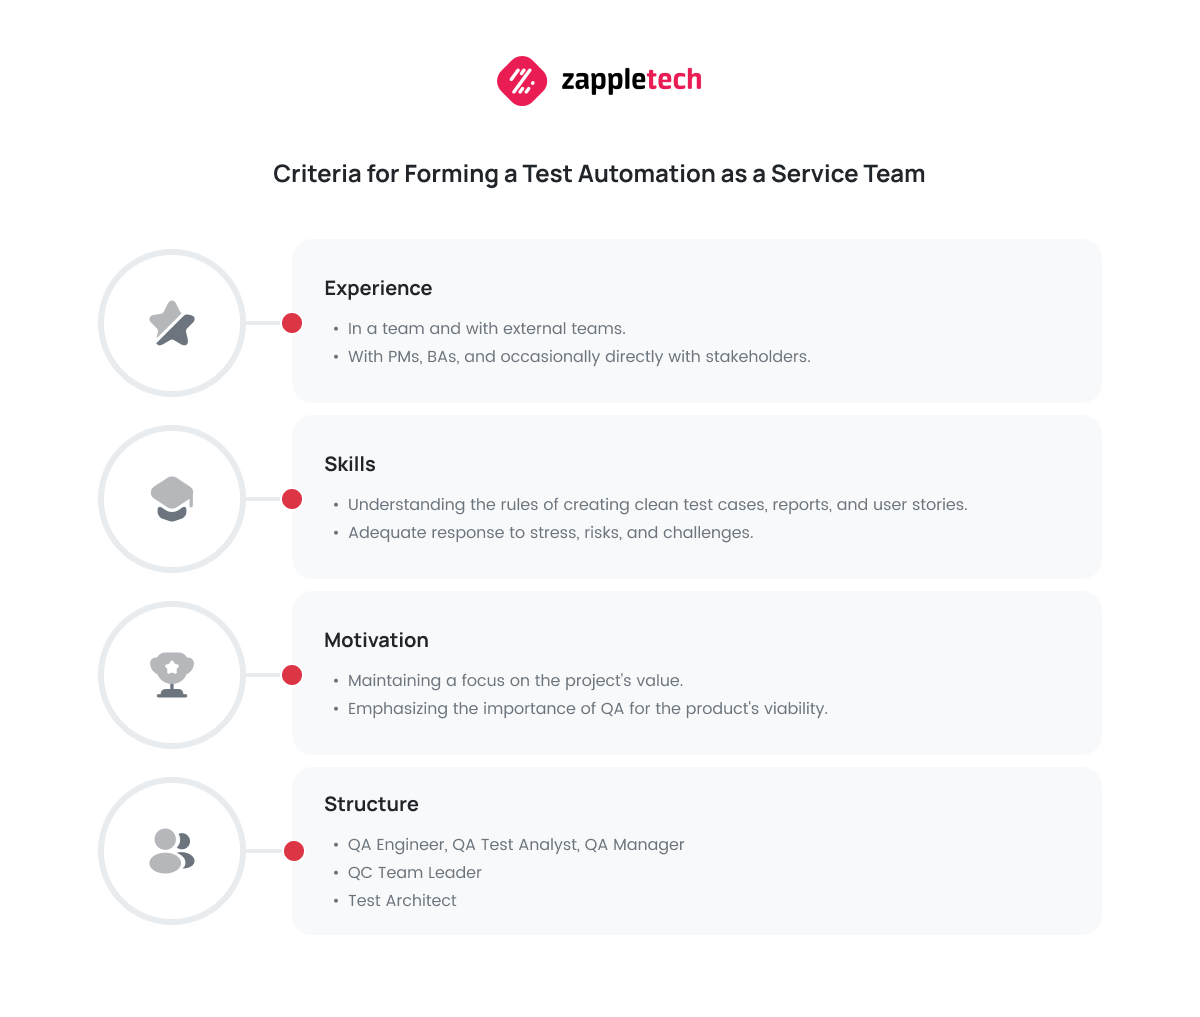 Criteria for Forming a Test Automation as a Service Team